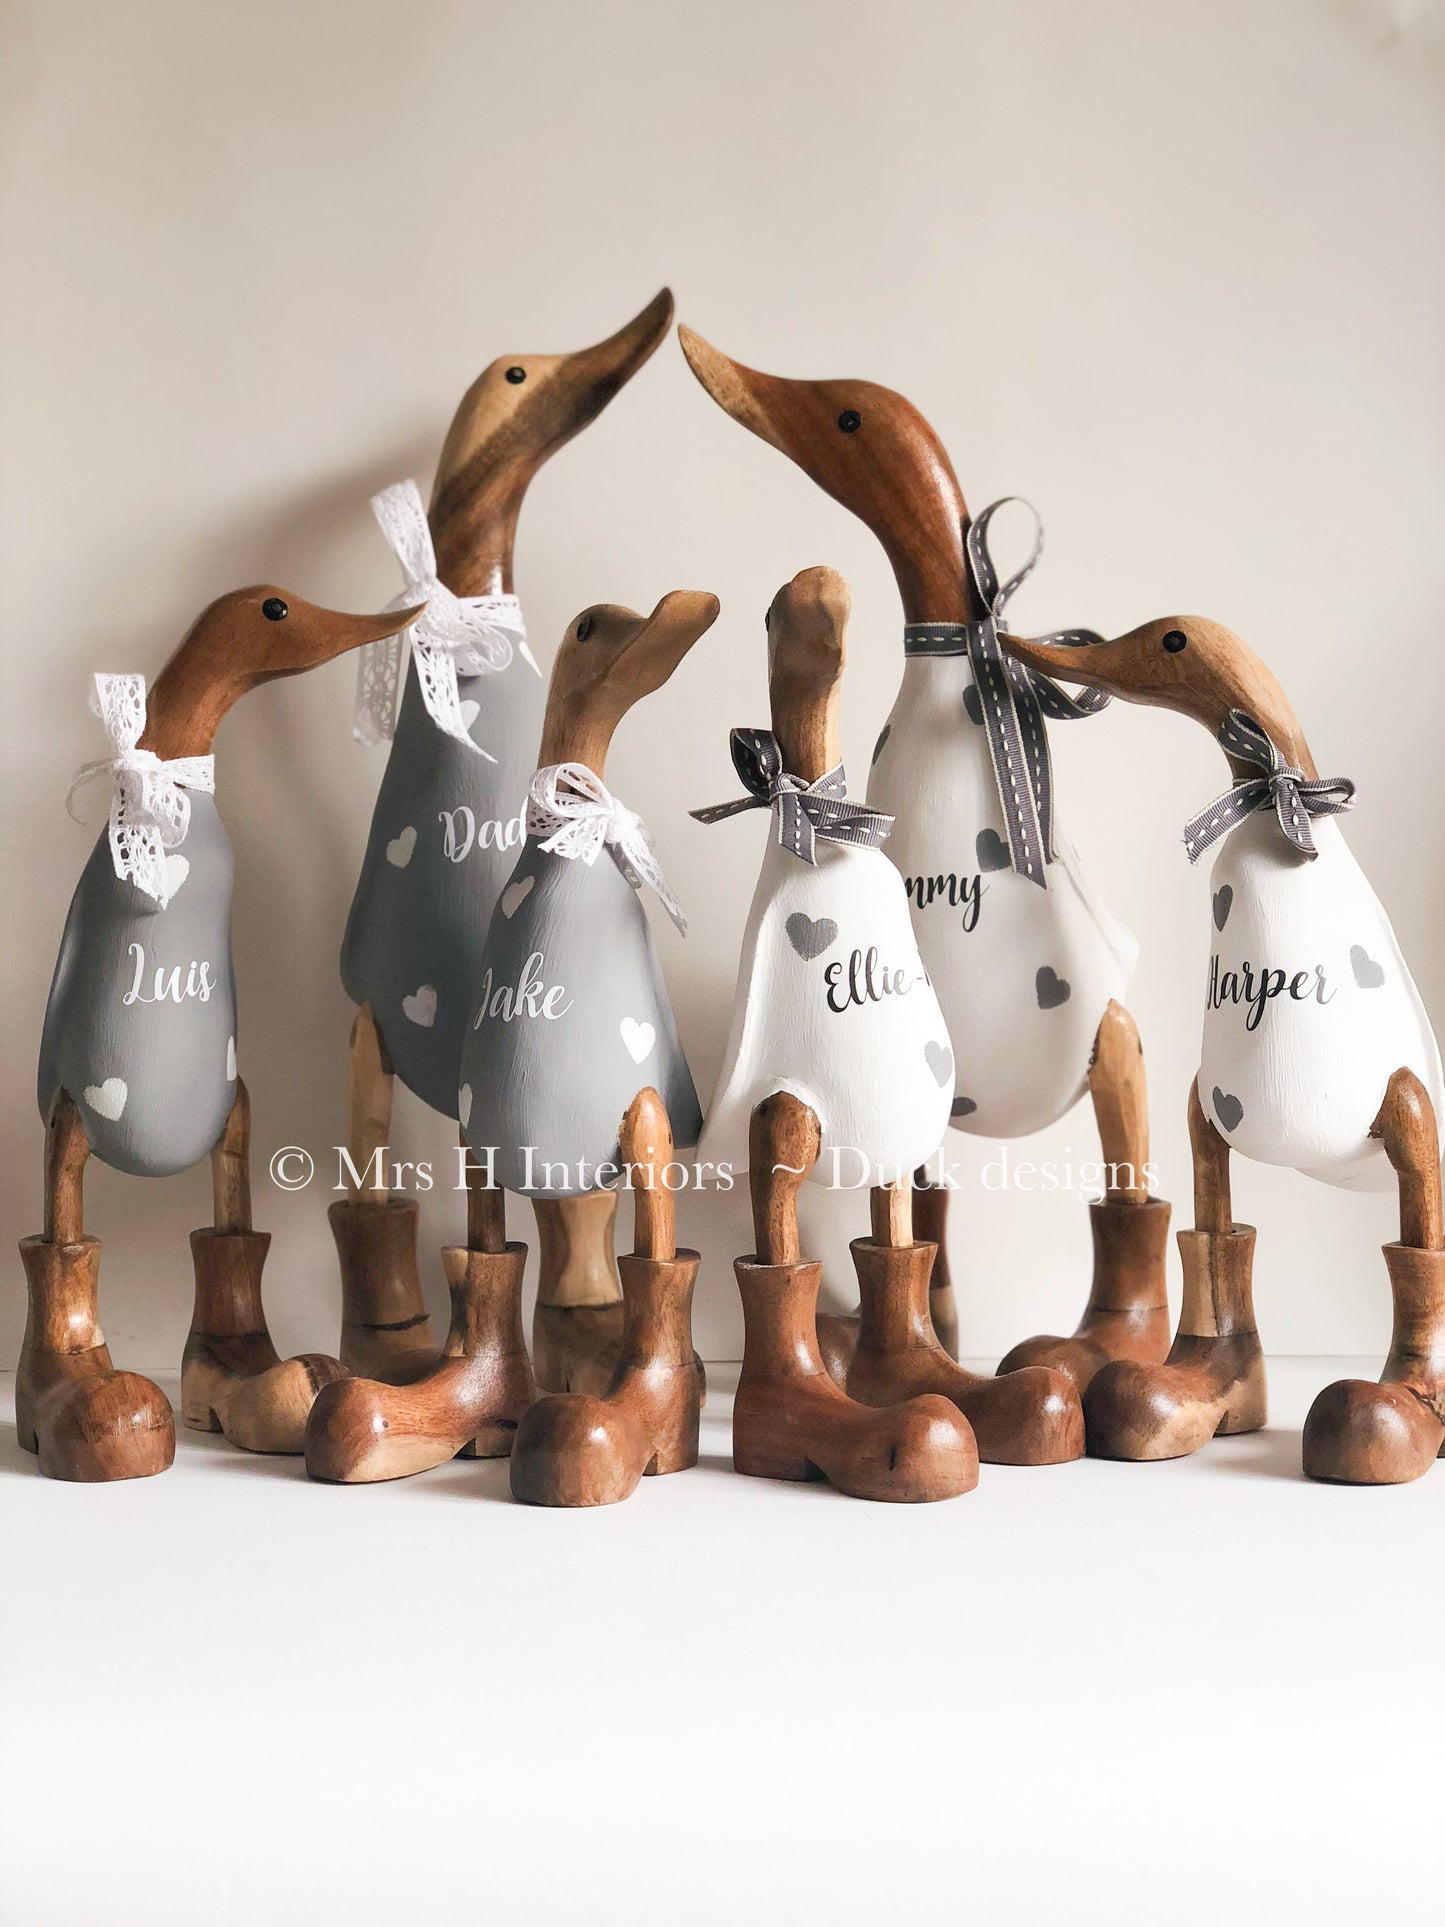 Family of Five Ducks - Decorated Wooden Duck in Boots by Mrs H the Duck Lady